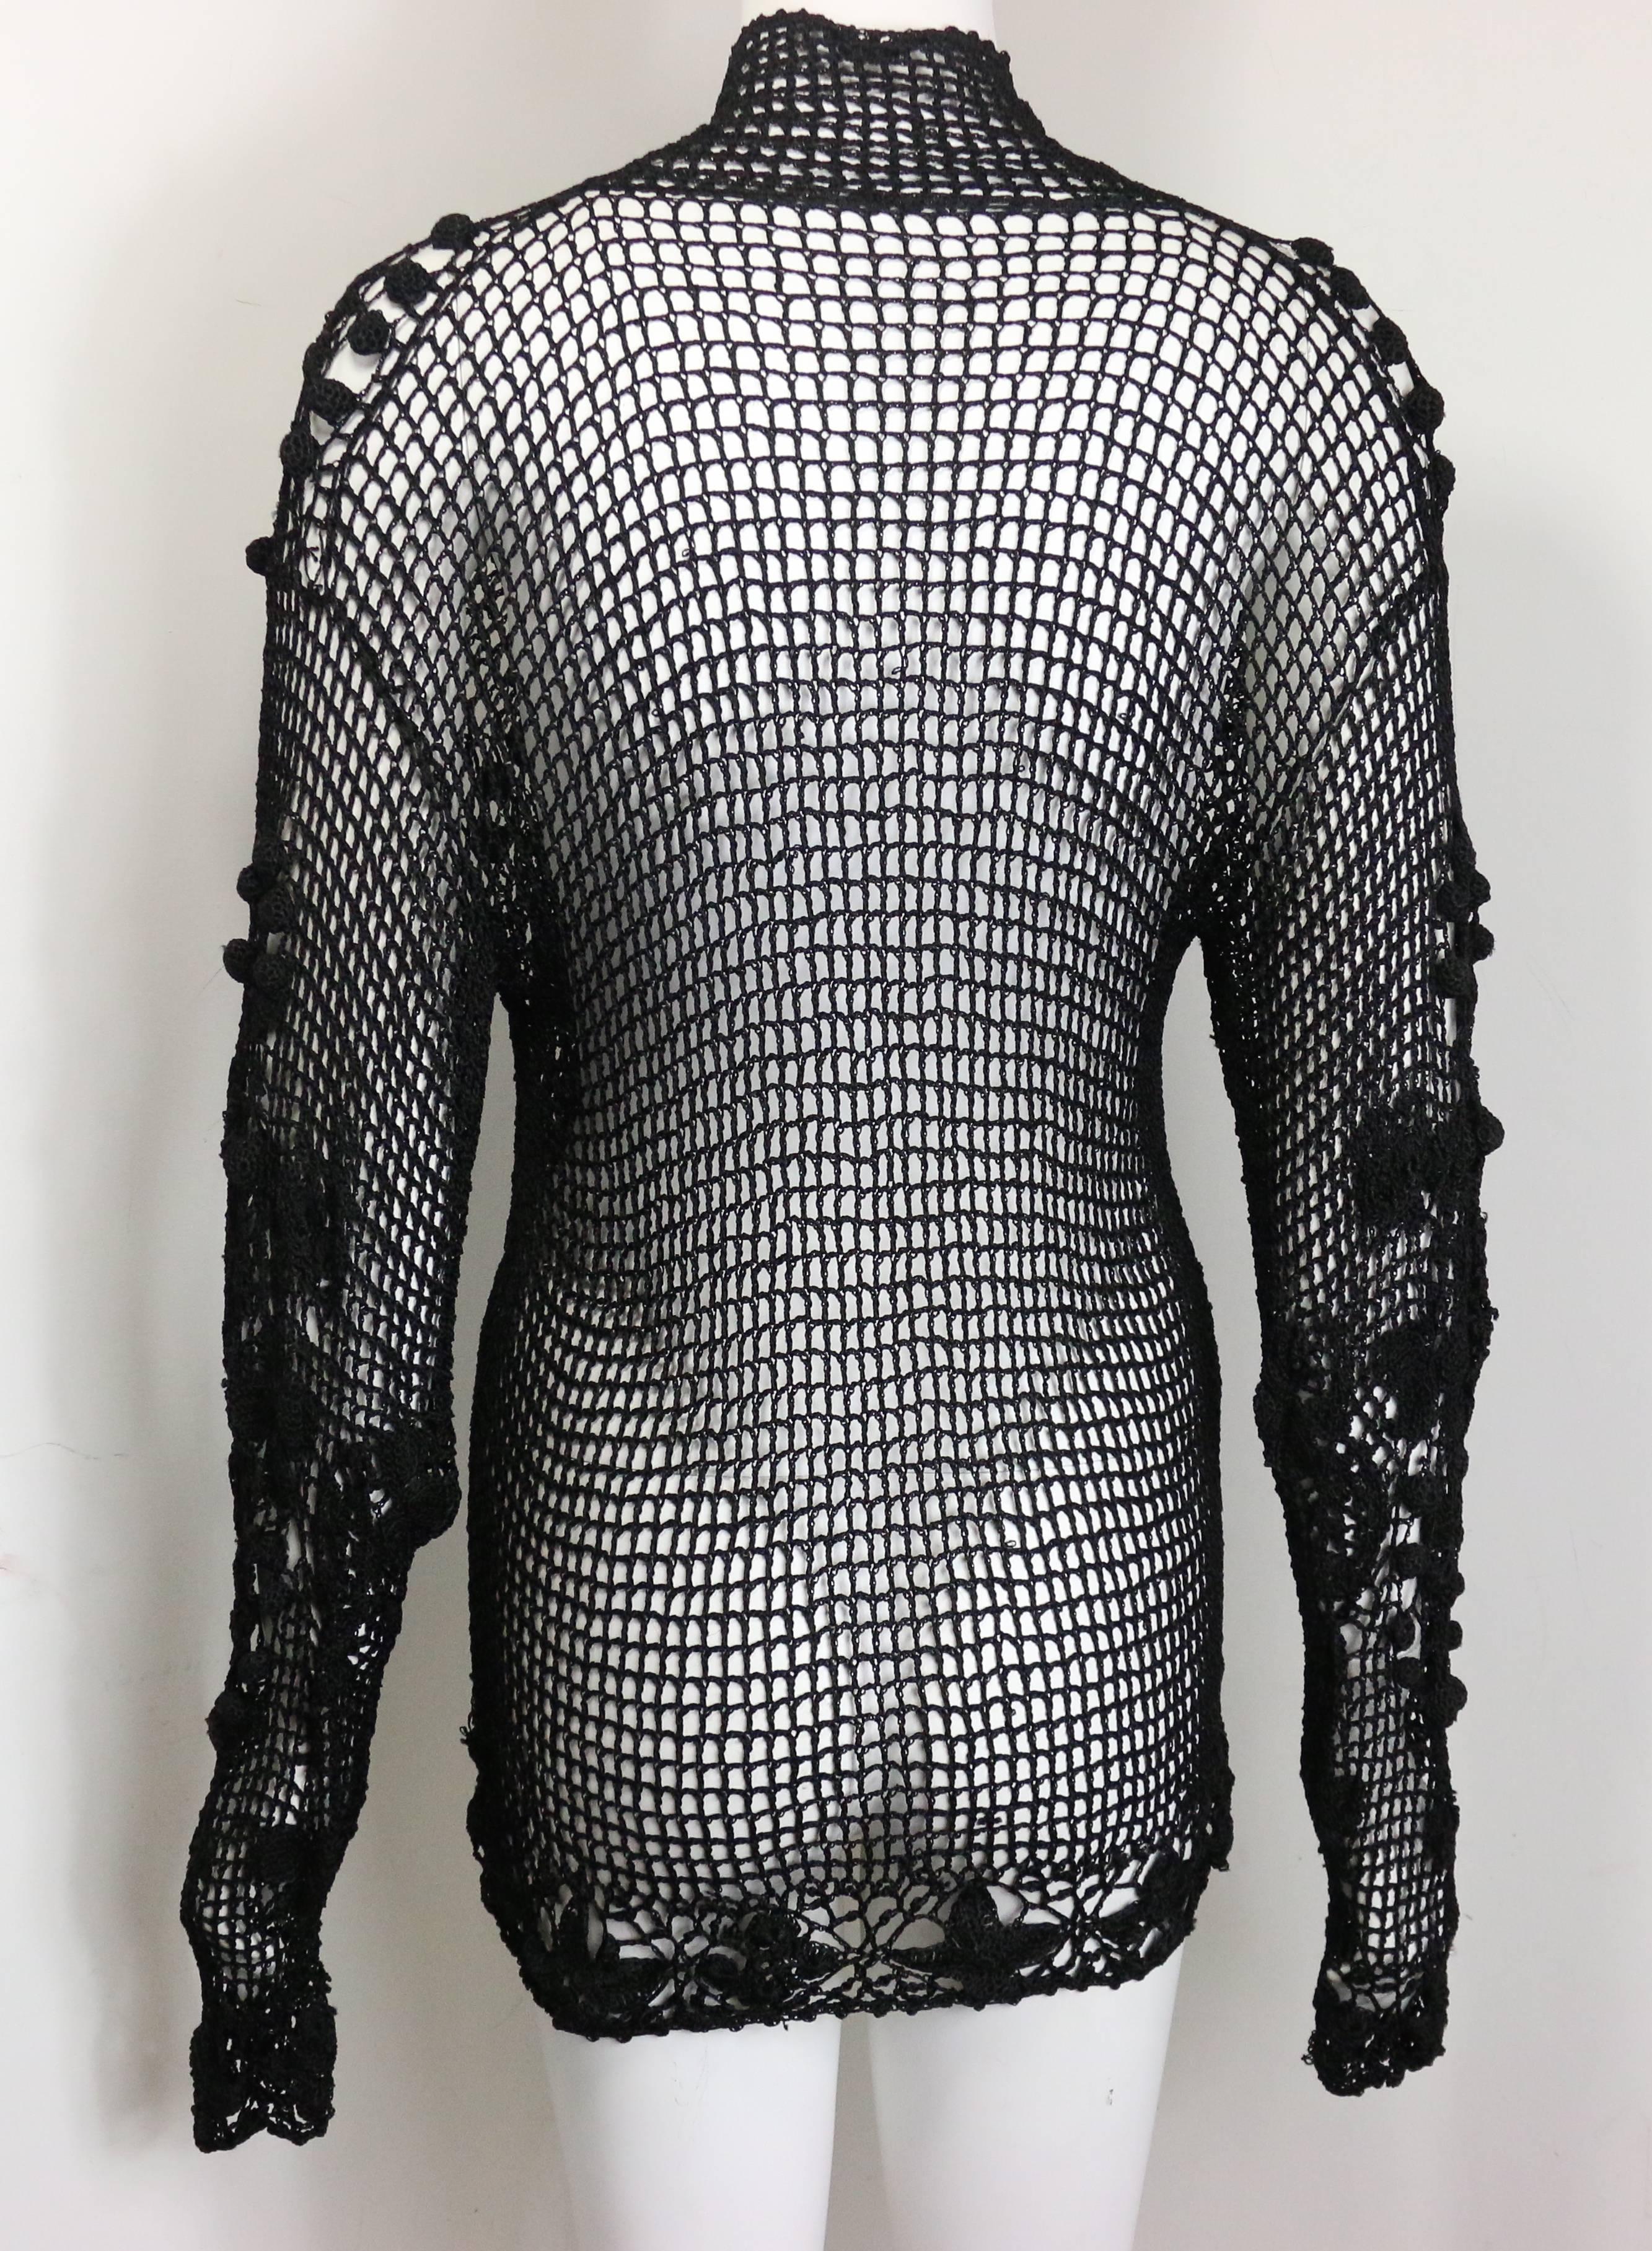 - Vintage 90s black knitted pattern long sleeves top. A very special knitted top. One of a kind!!!


